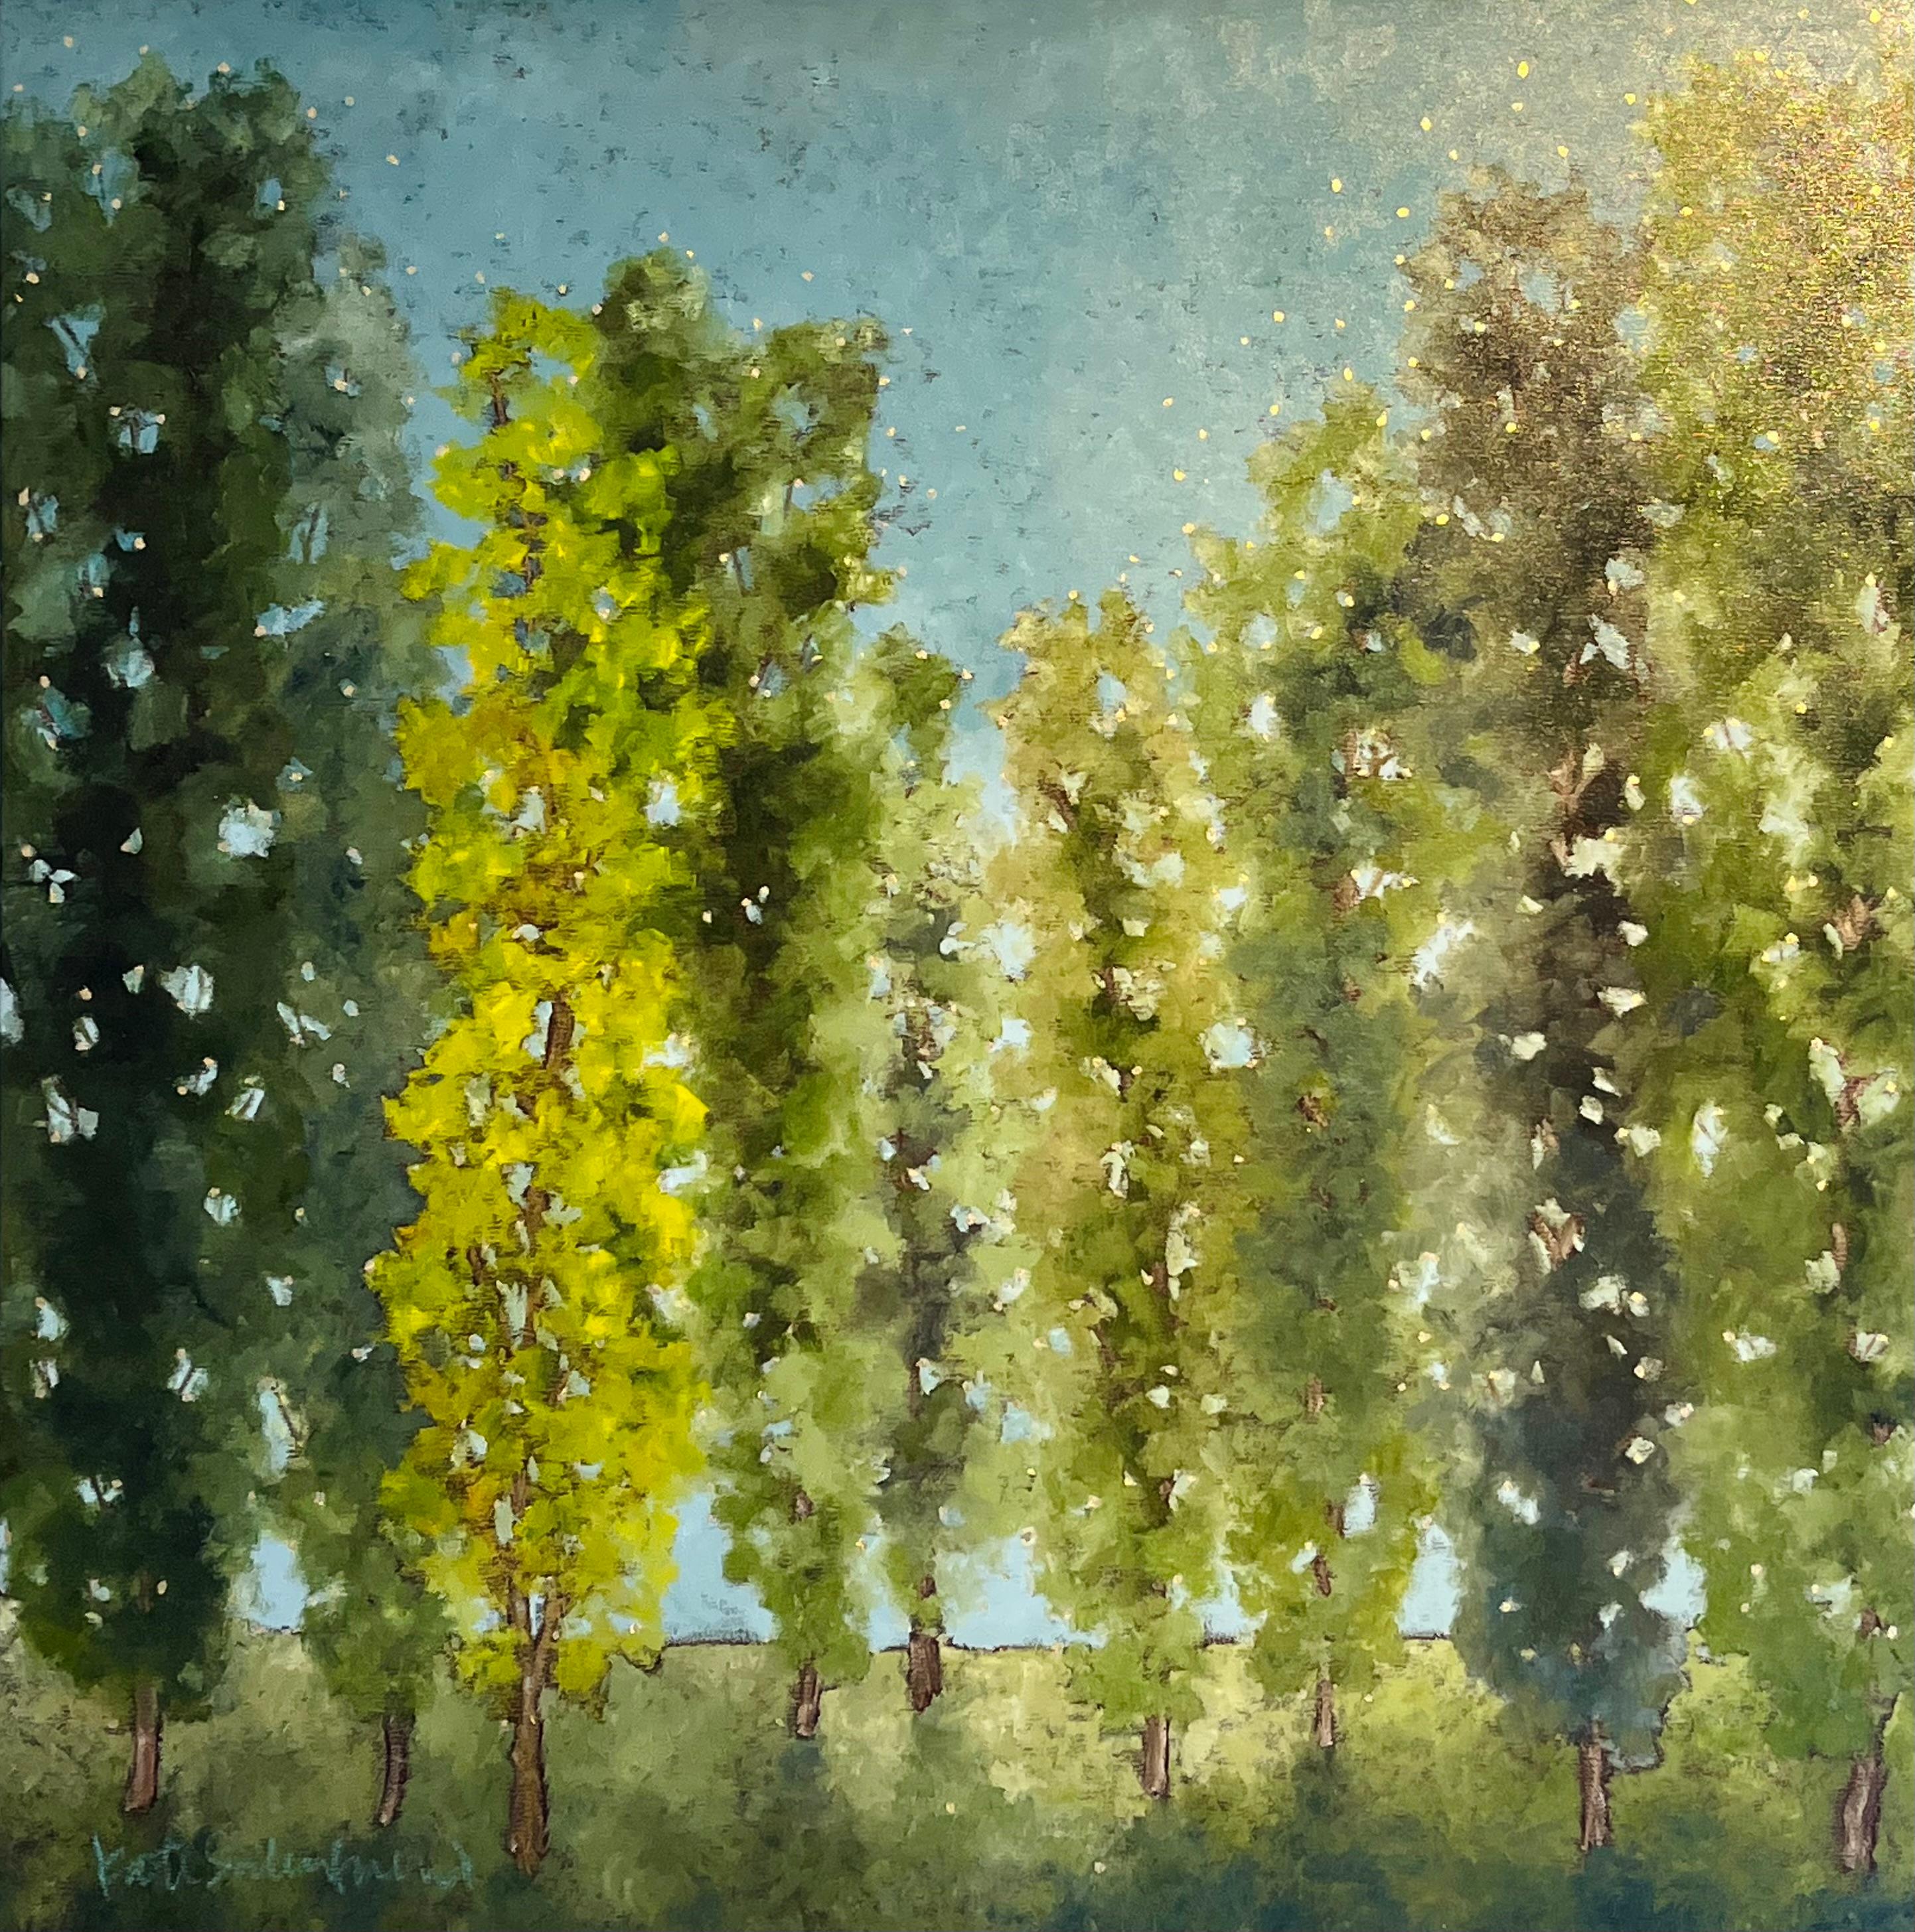 Dreams-original modern abstract trees landscape oil paintings-contemporary Art - Realist Painting by Kate Salenfriend